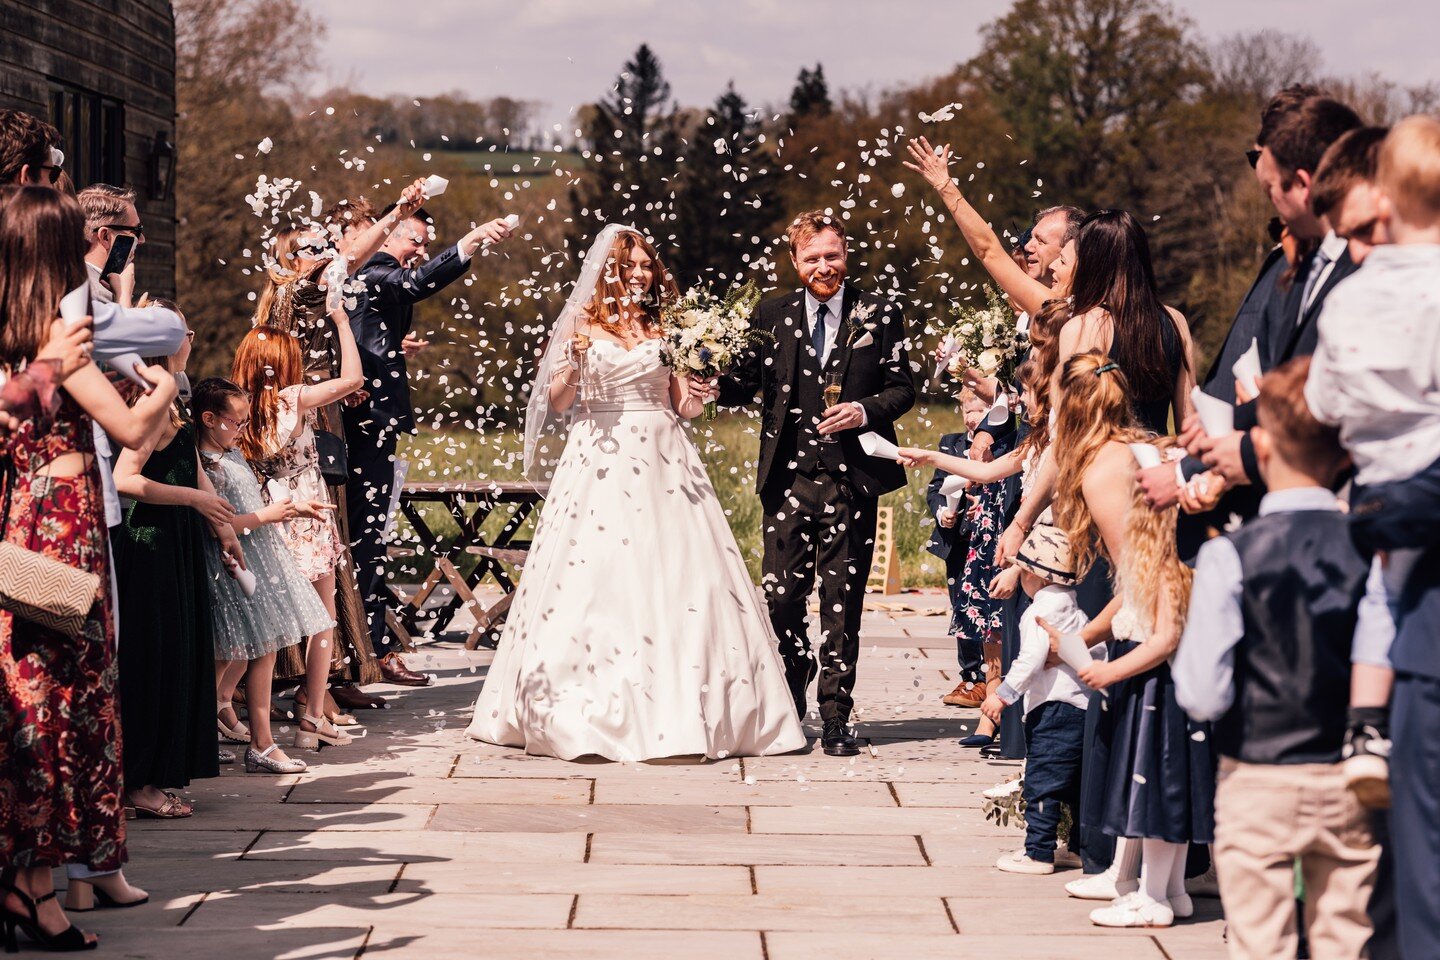 It has been such a joy filtering through and editing Amy &amp; David's wedding photos. 

Looking through their gallery has reminded me of all the amazing moments that happened on their special day. 

I have just sent their full gallery and I really h